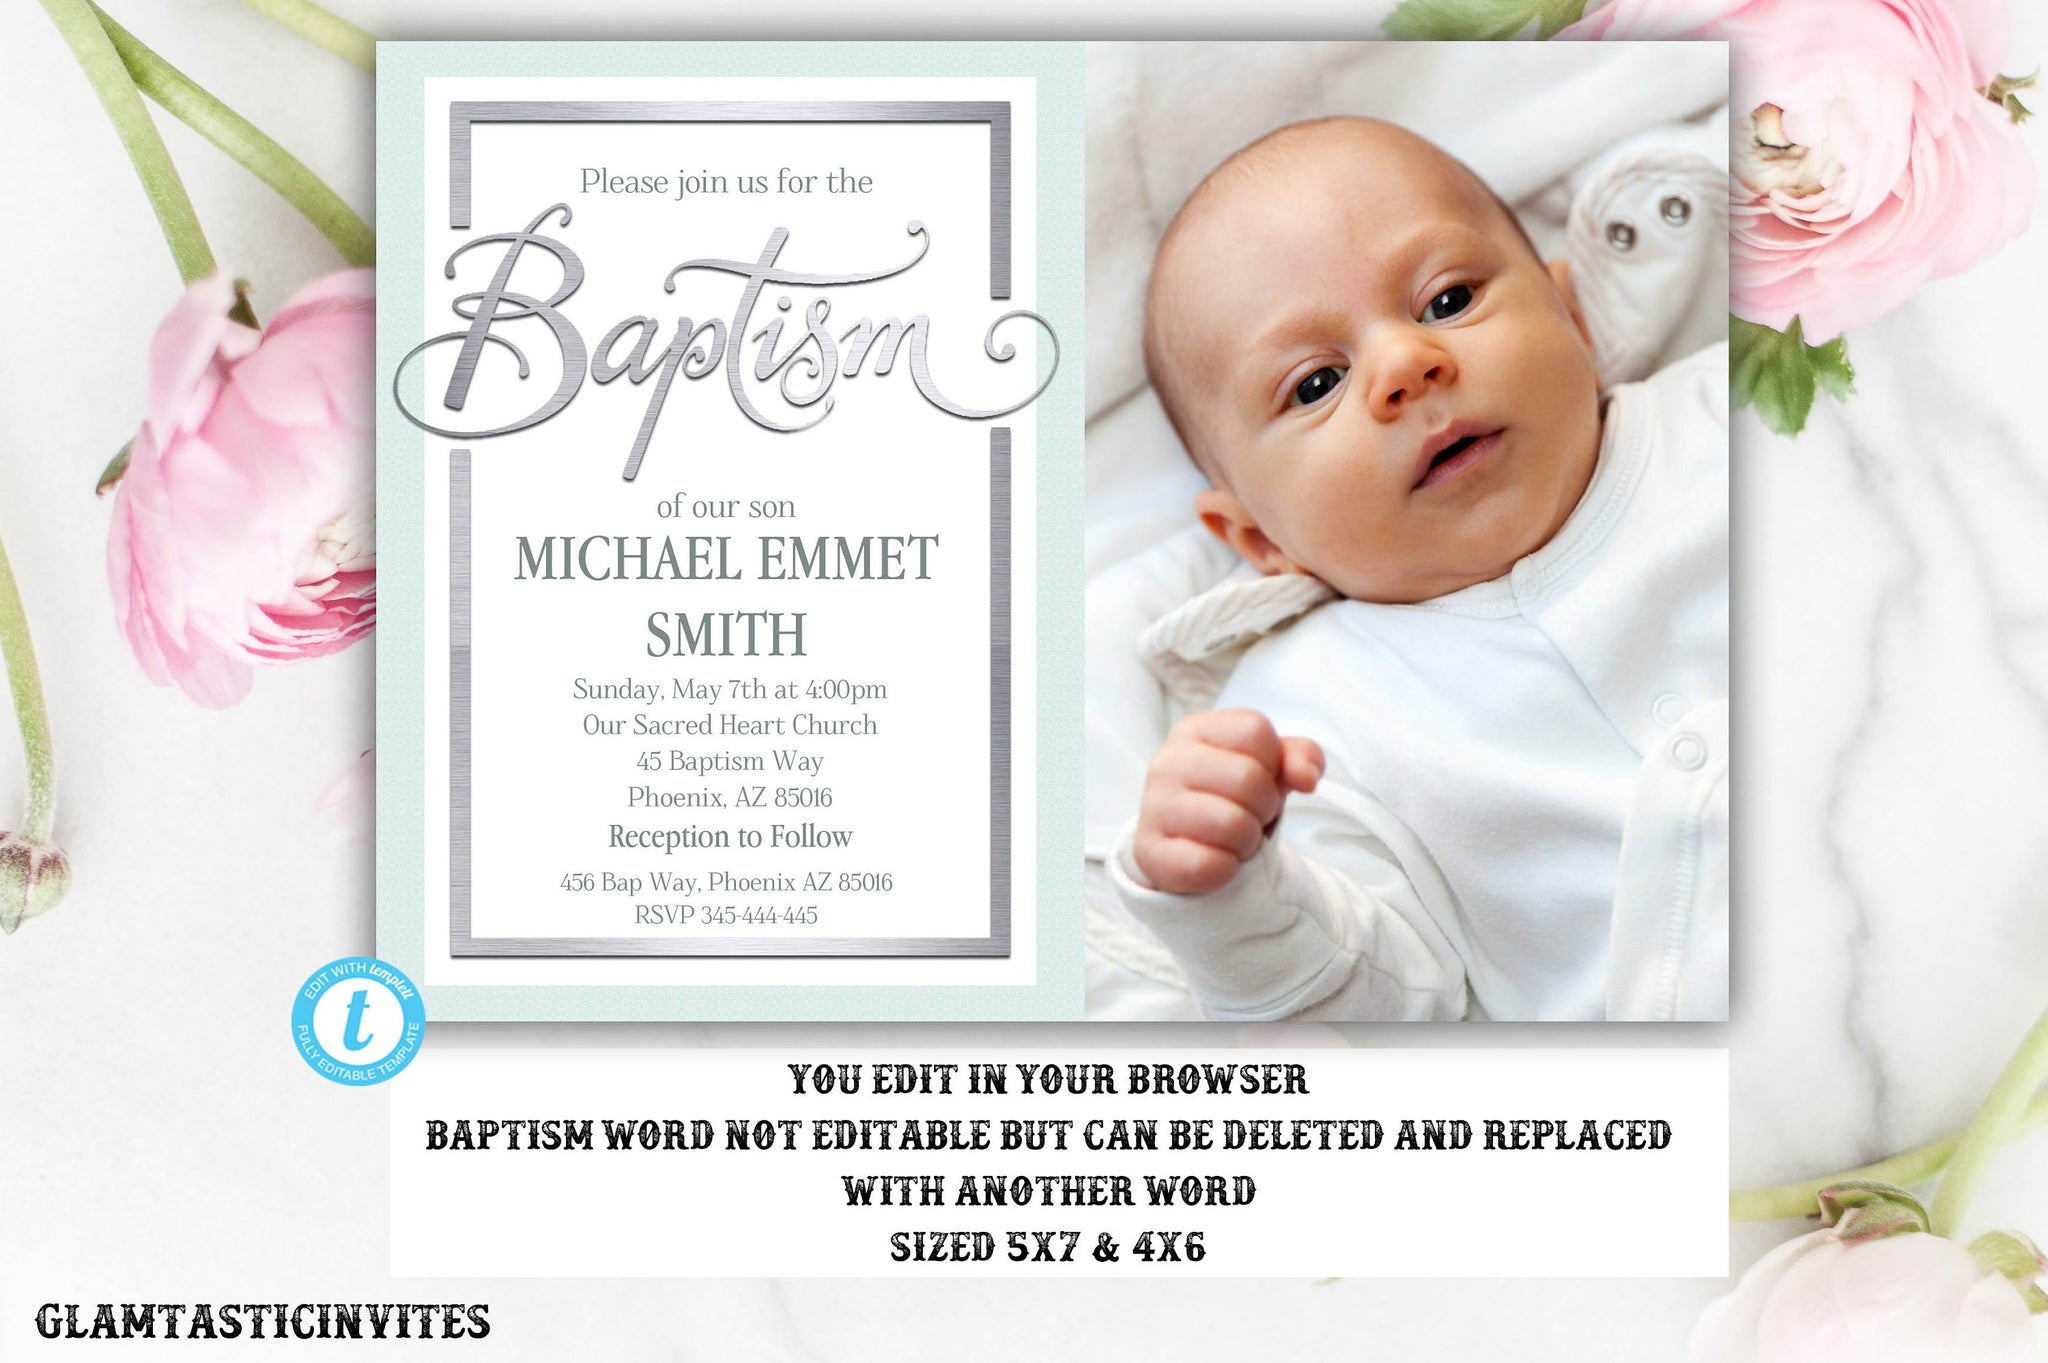 How To Make Your Own Baptism Invitations